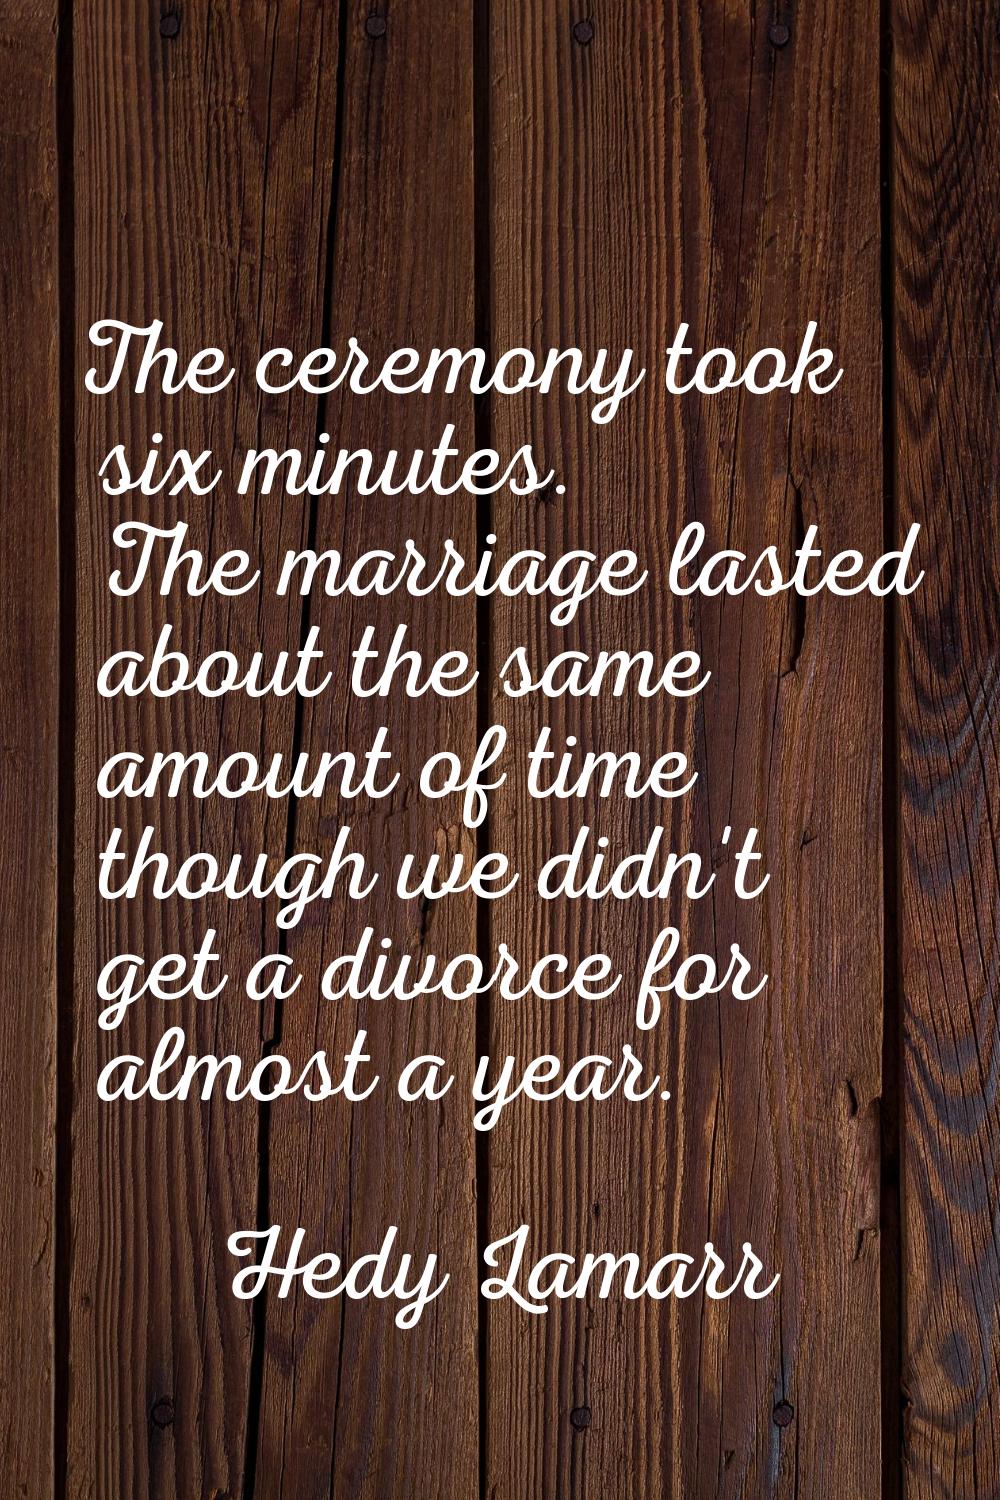 The ceremony took six minutes. The marriage lasted about the same amount of time though we didn't g